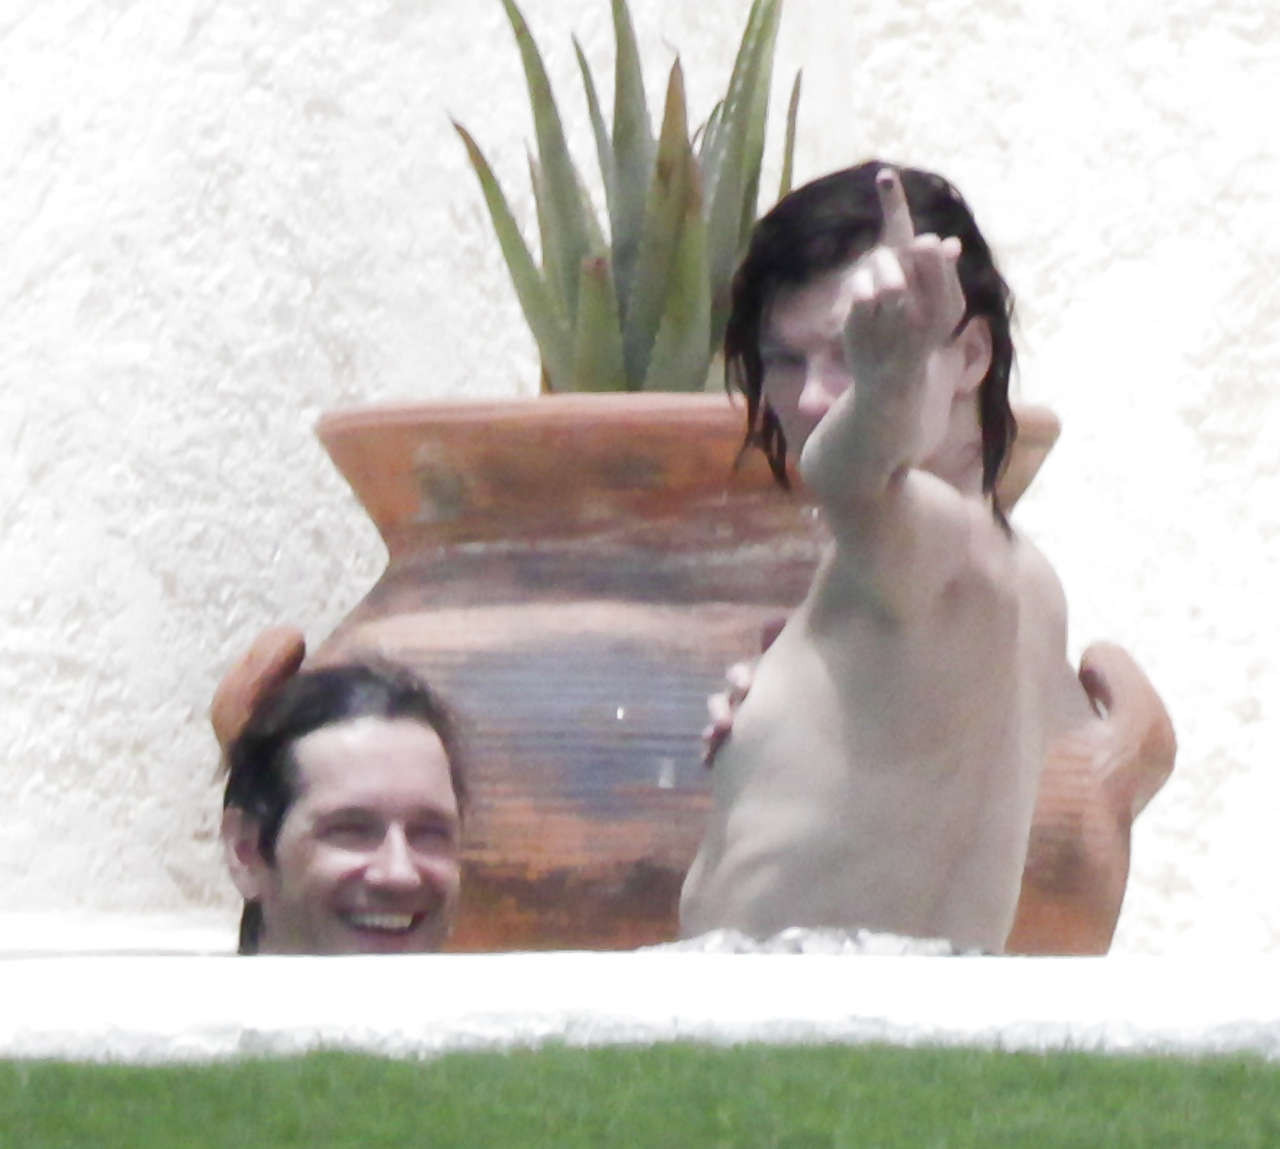 Milla Jovovich caught topless in pool by paparazzi and giving them middle finger #75289832